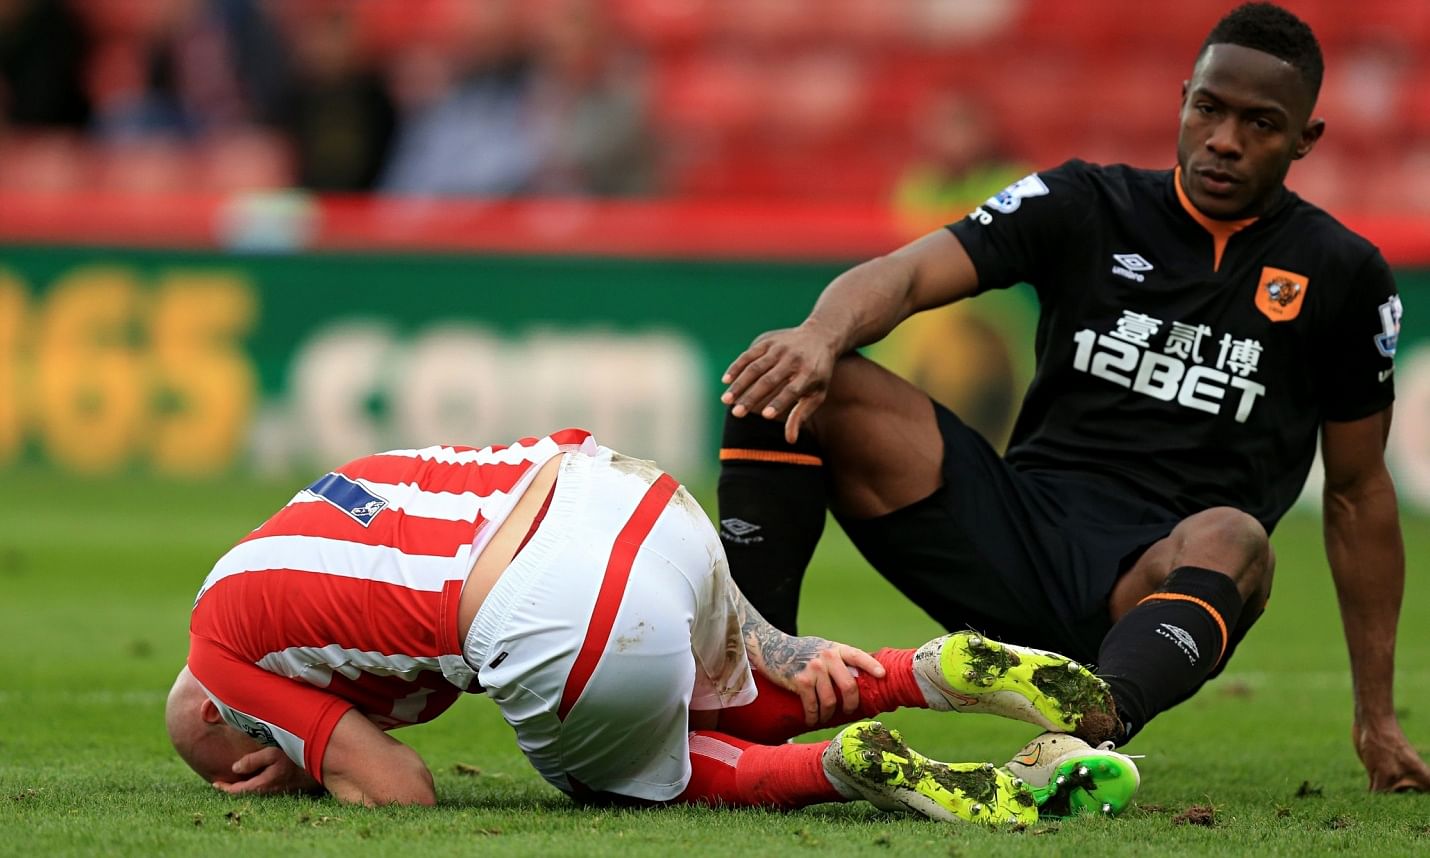 Gruesome image of Stephen Ireland's calf injury surfaces after horror tackle